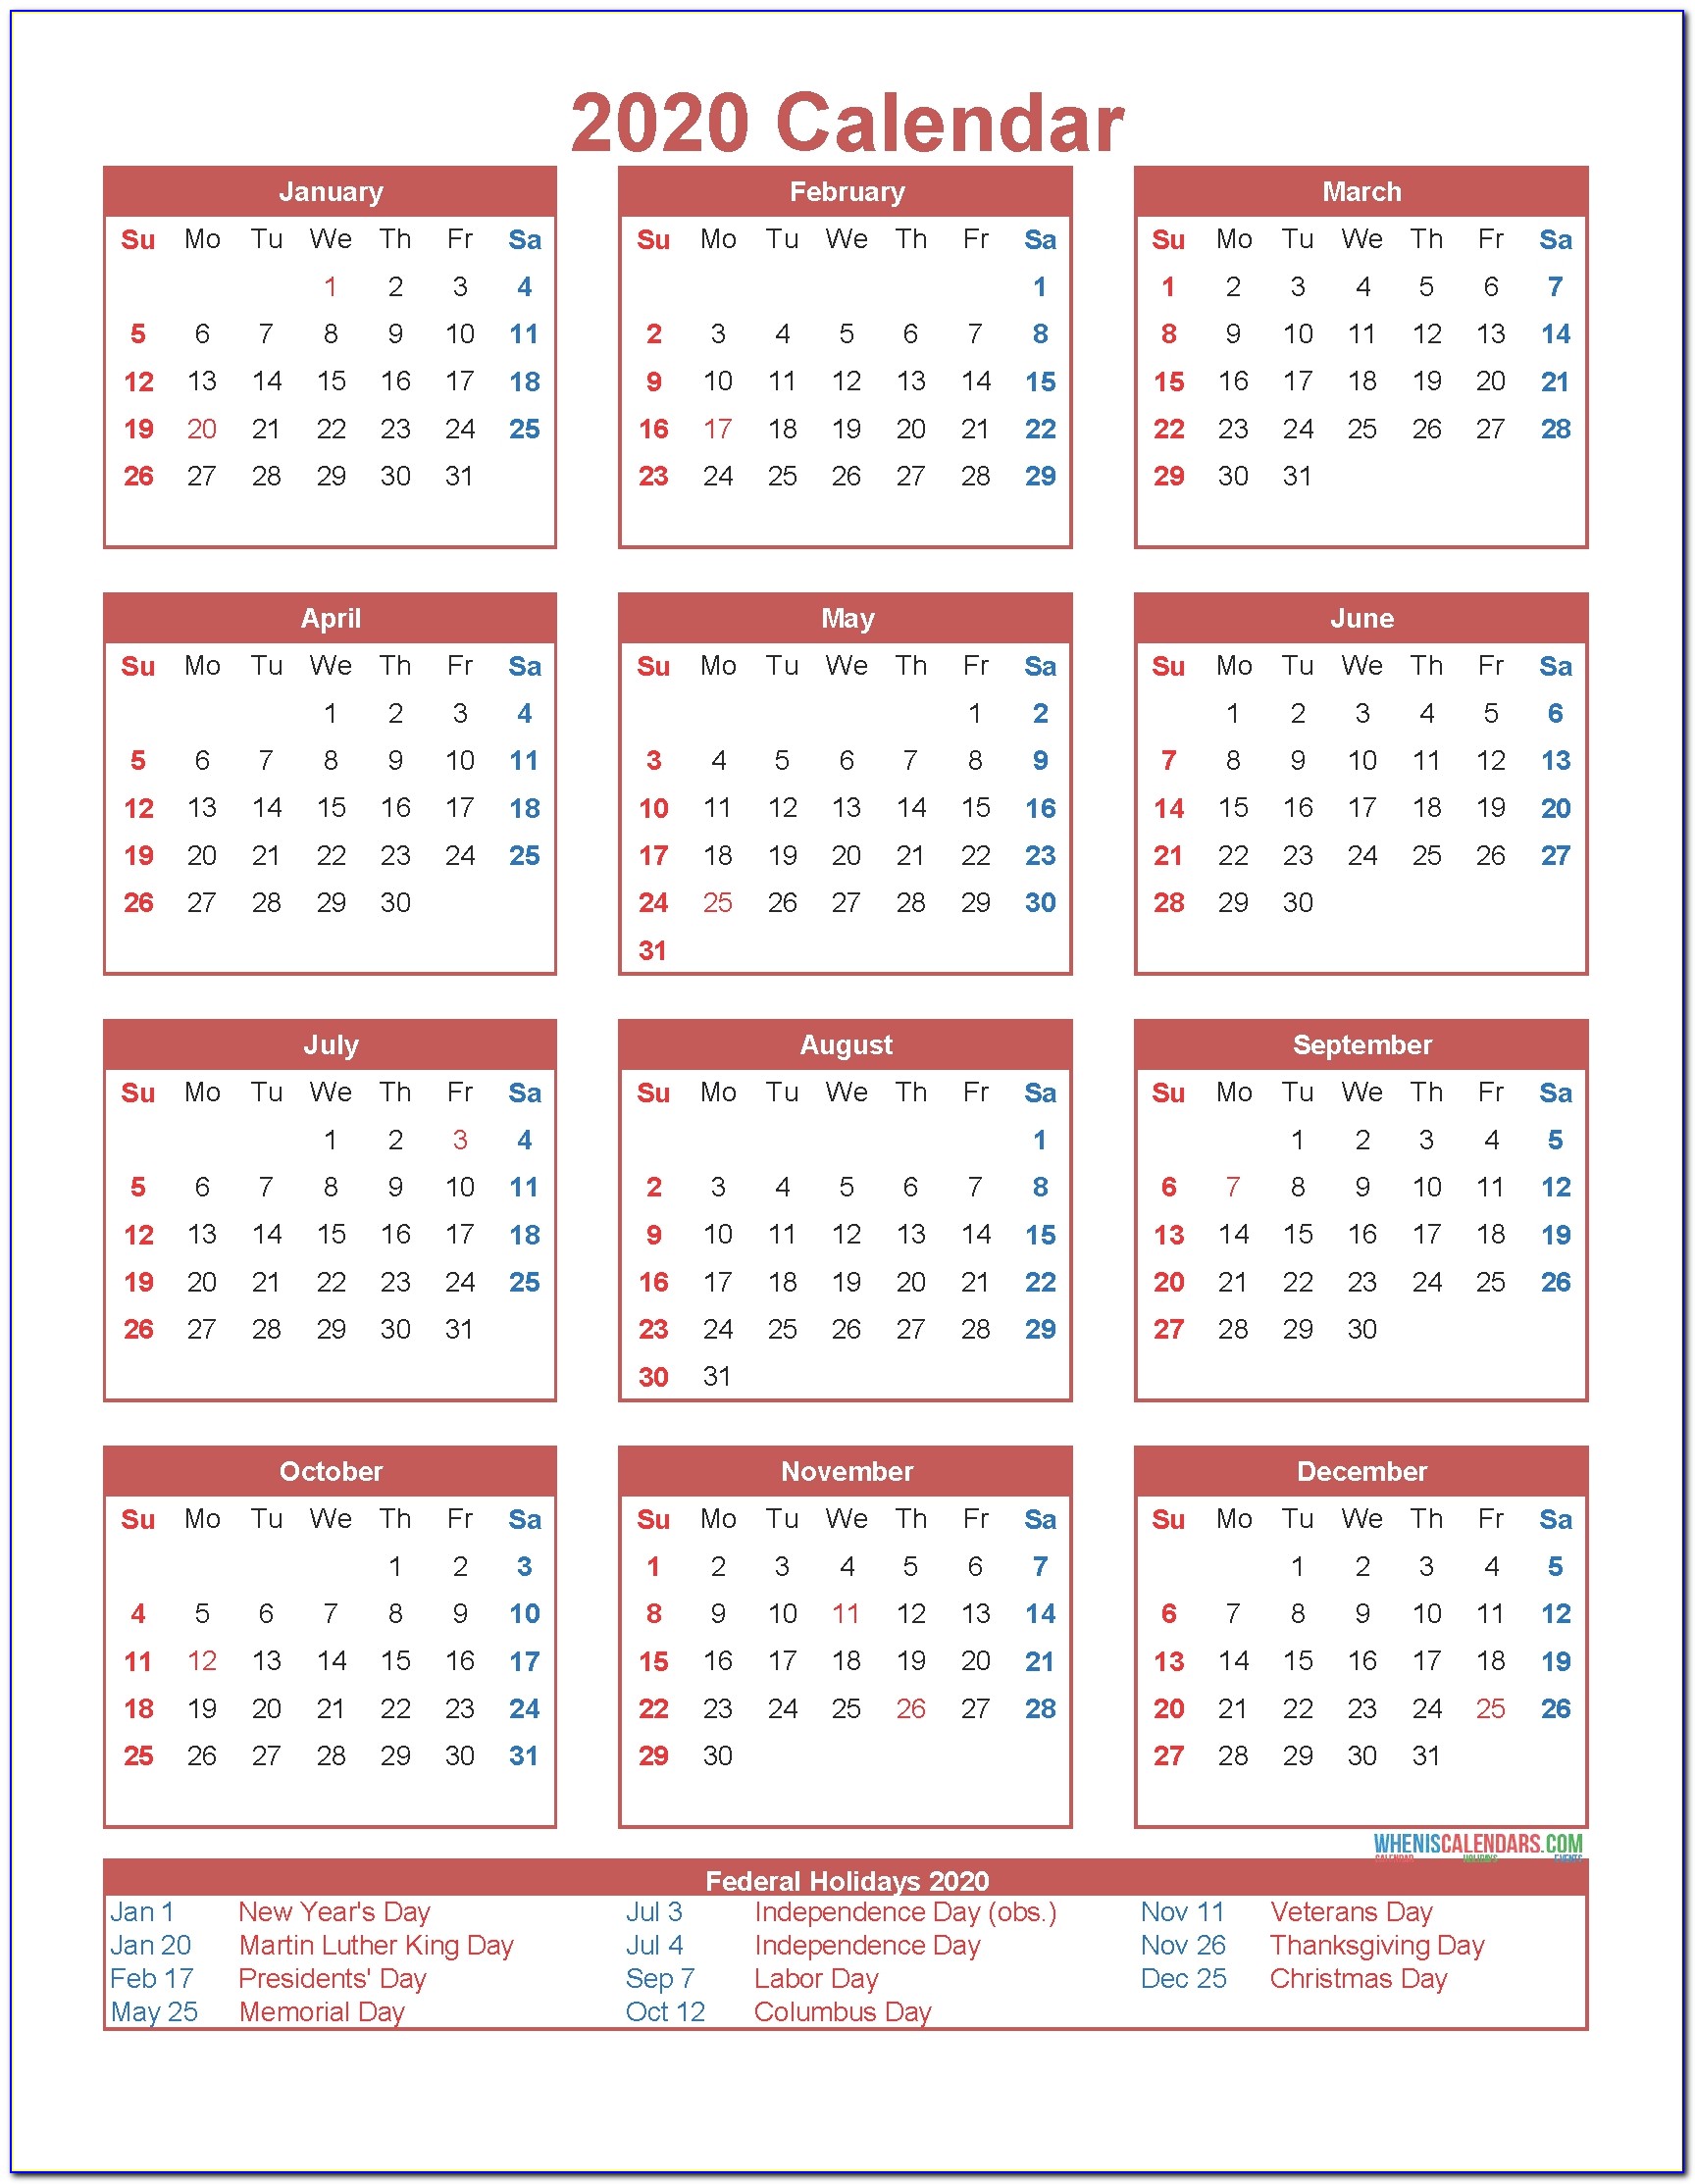 Month At A Glance Blank Calendar Template